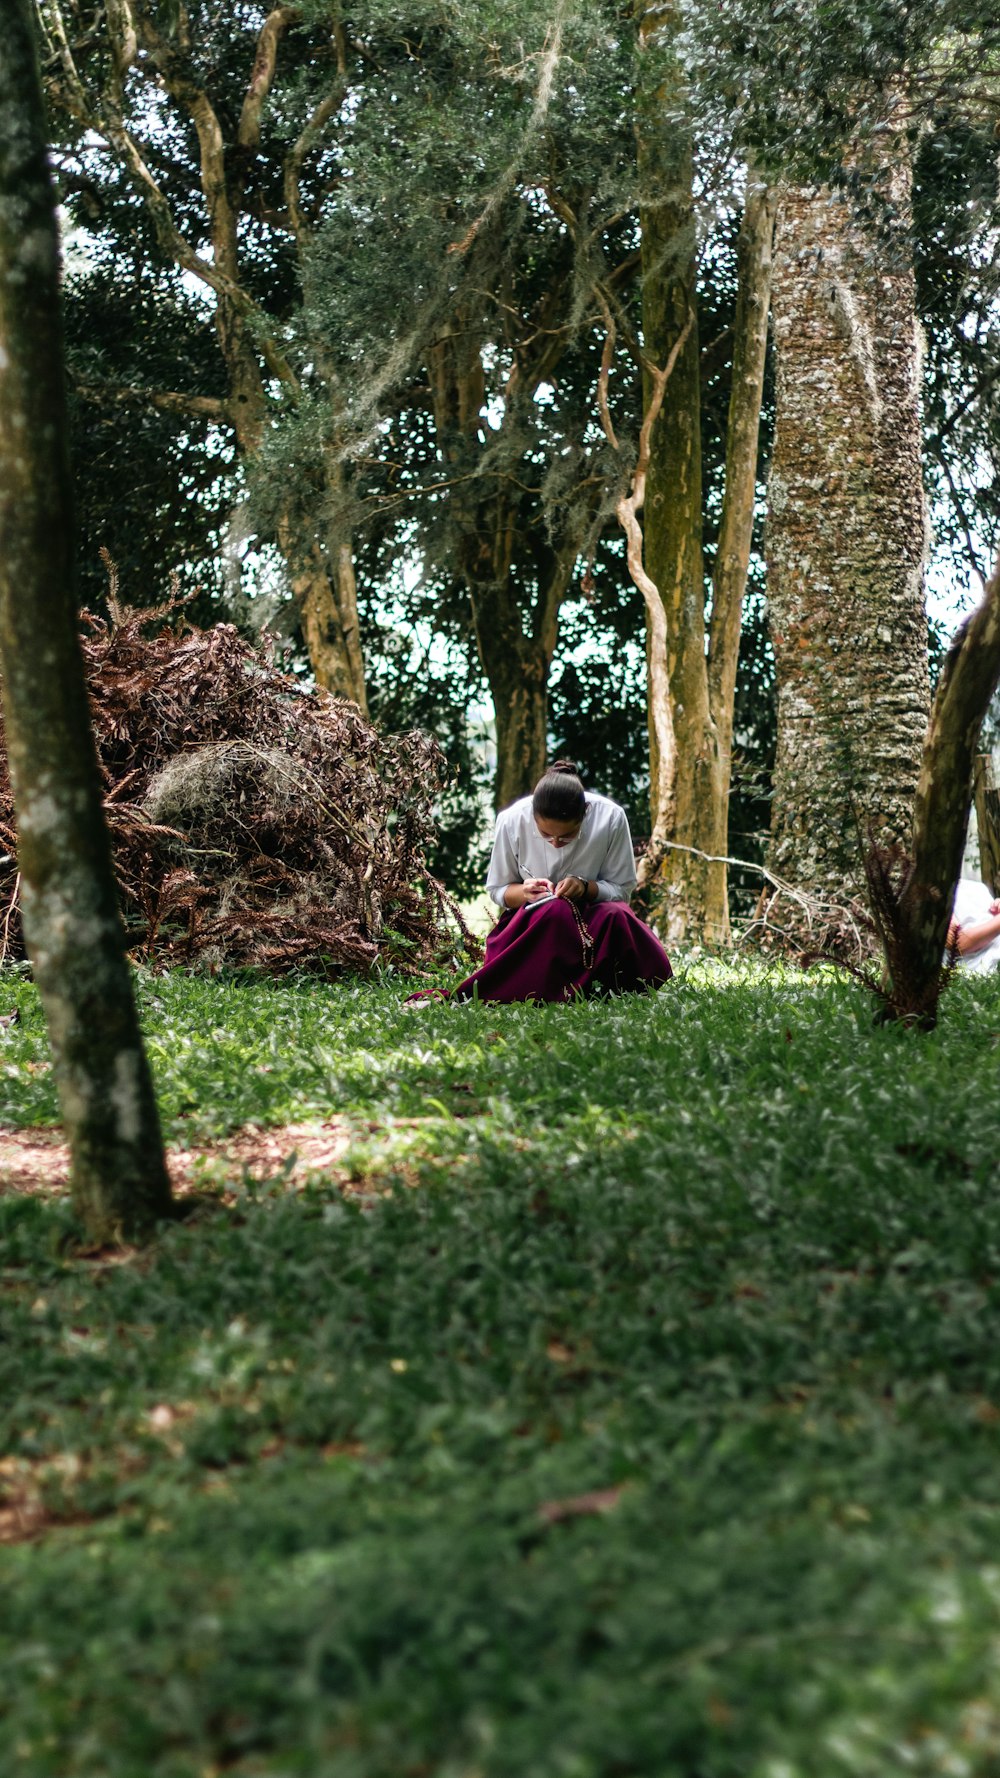 a person sitting on the ground in a forest